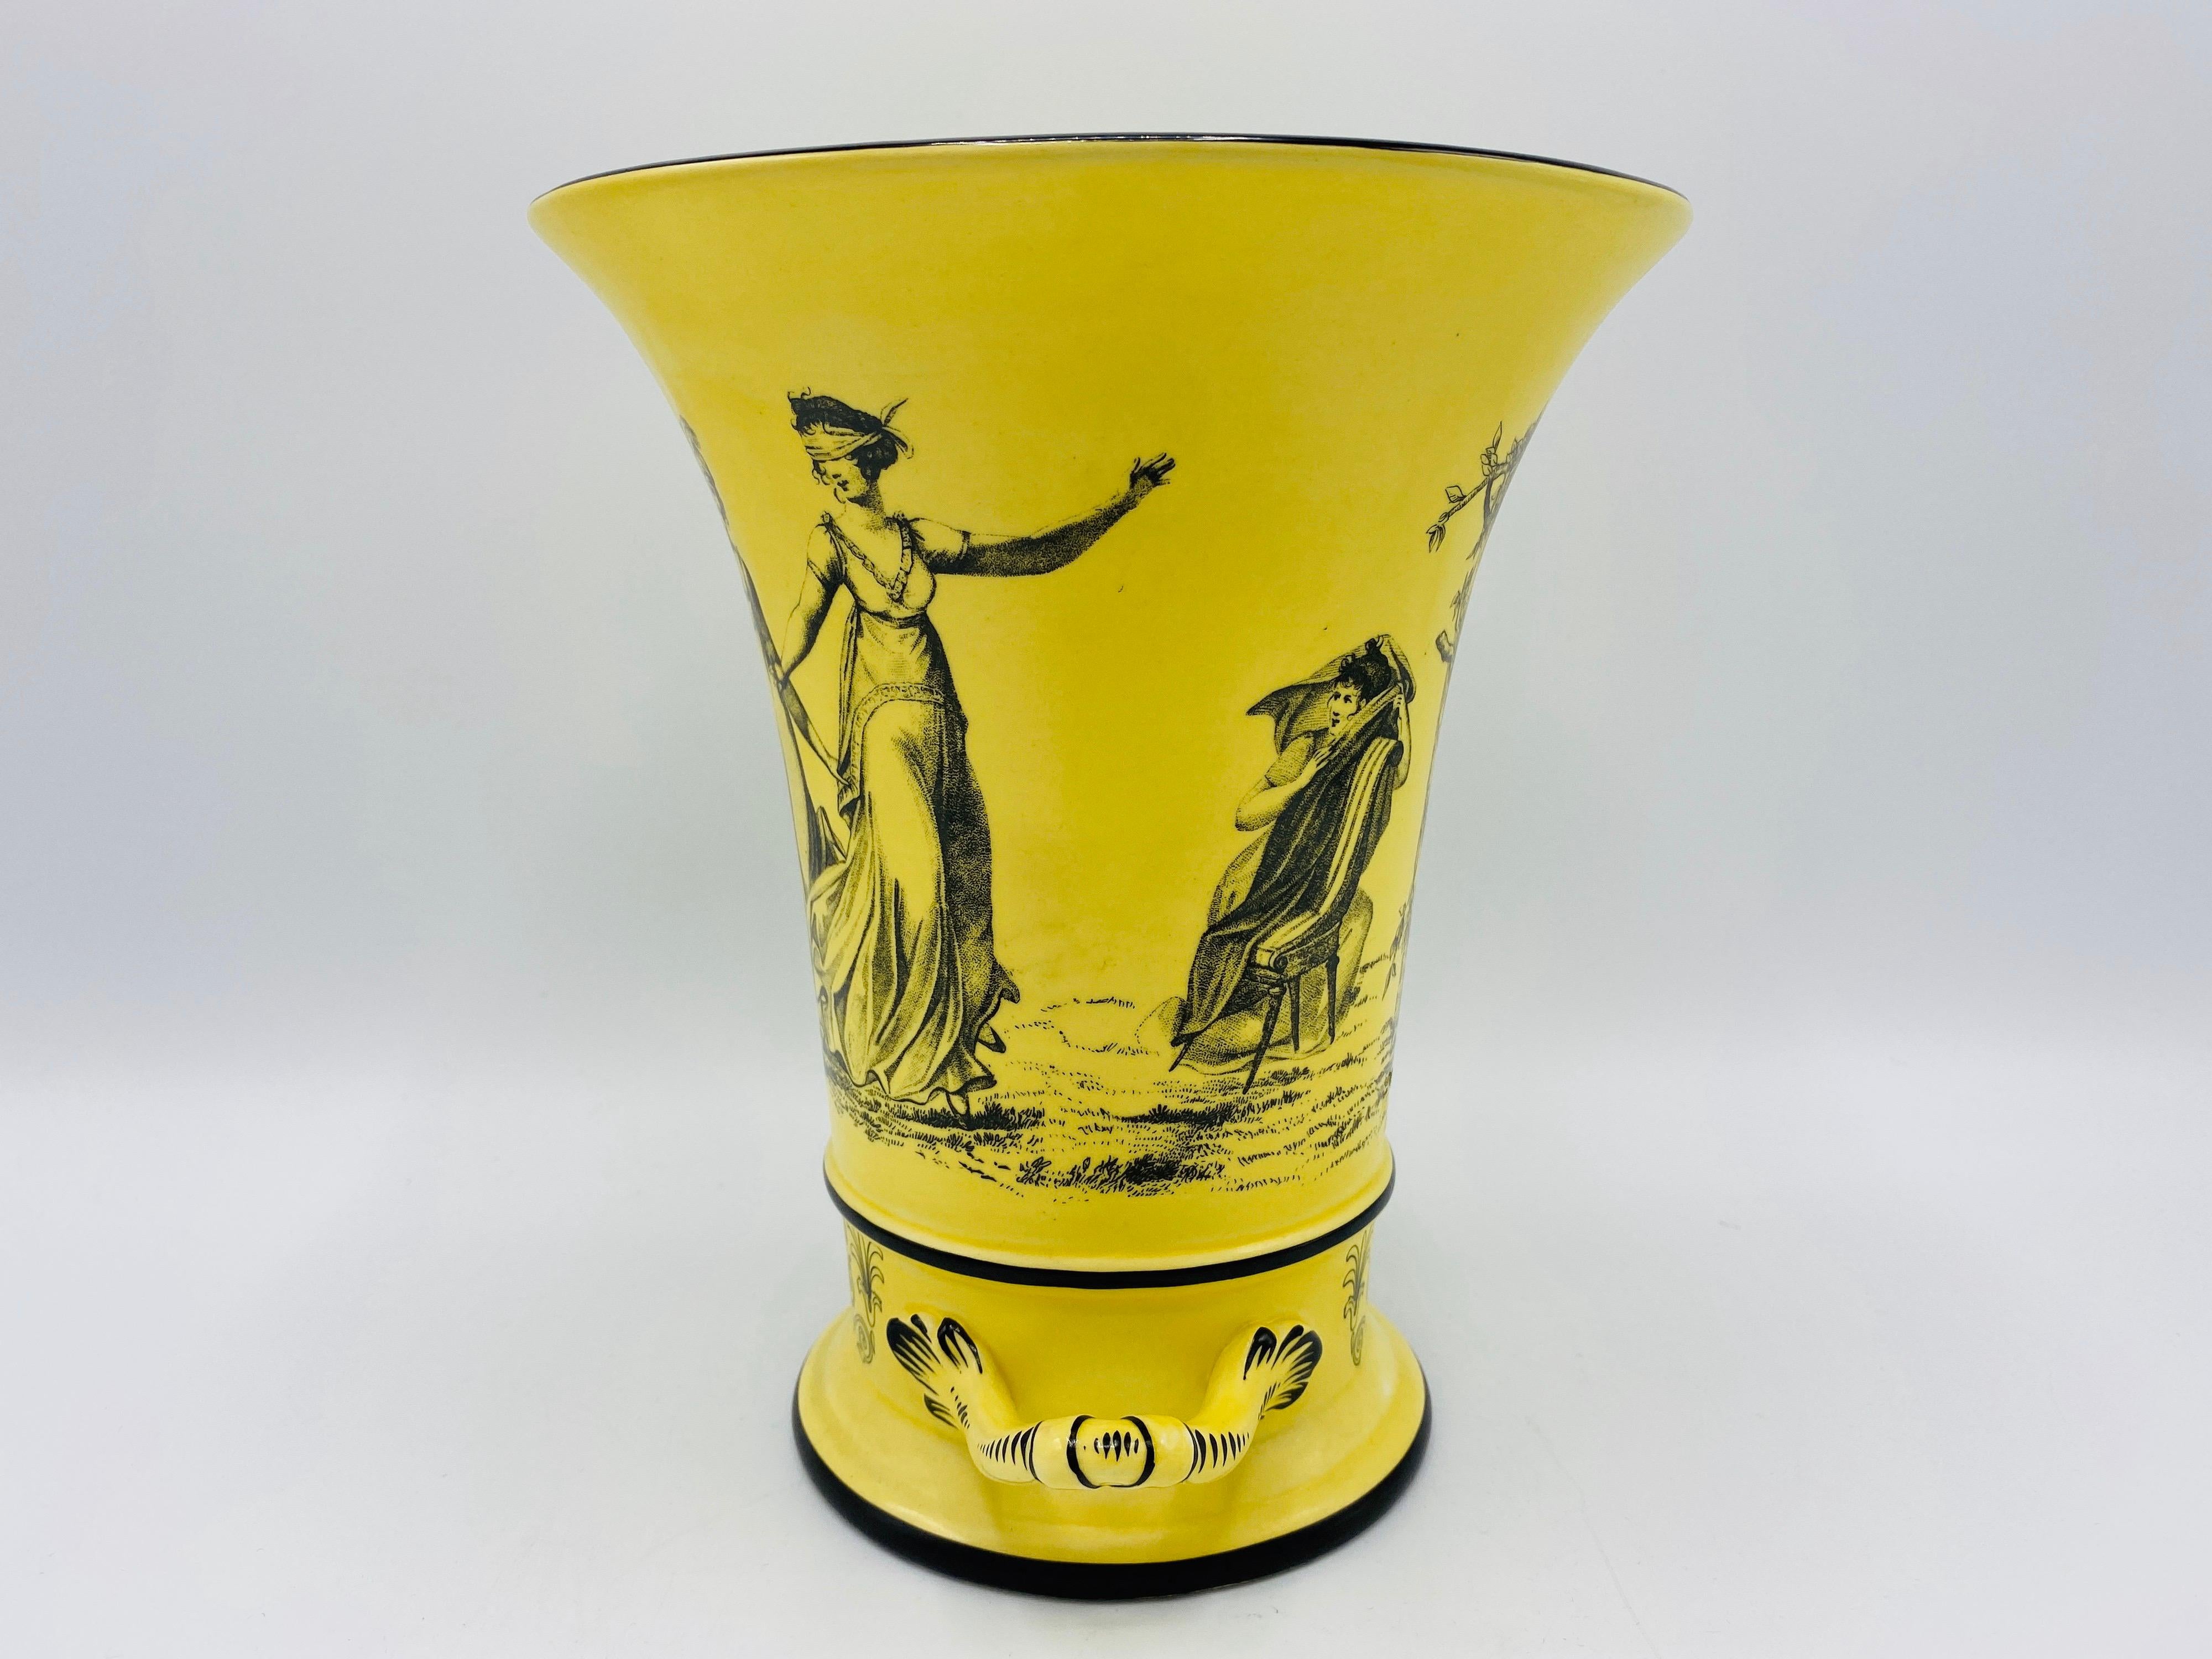 20th Century Italian Mottahedeh Yellow and Black Toile Handled Urn Vases, Pair, 1960s For Sale